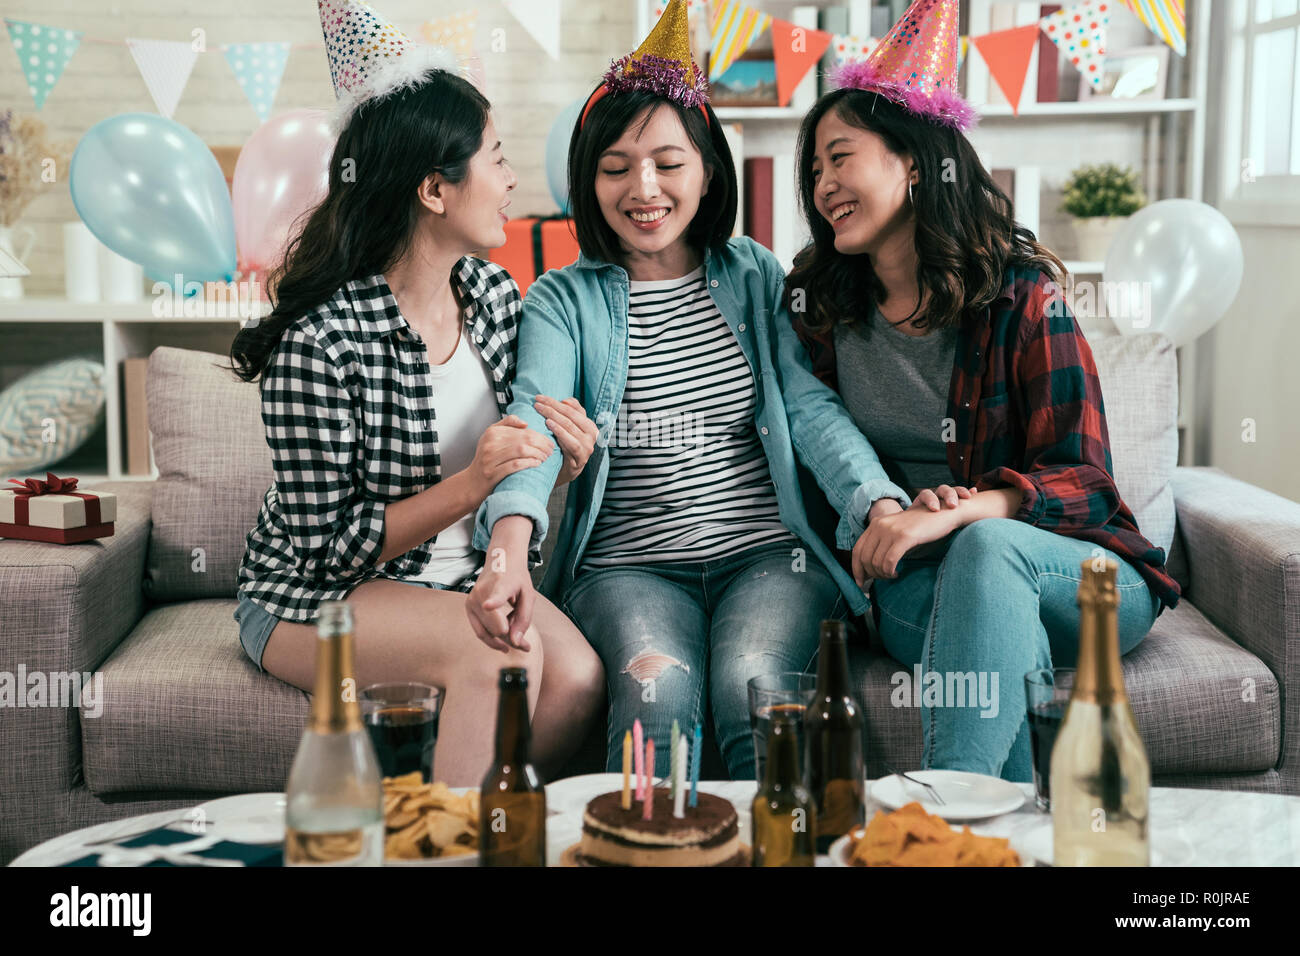 Group of young friends with food and bottles of drink celebrating in home interior. sisters having fun birthday house party with funny hats. girls sit Stock Photo